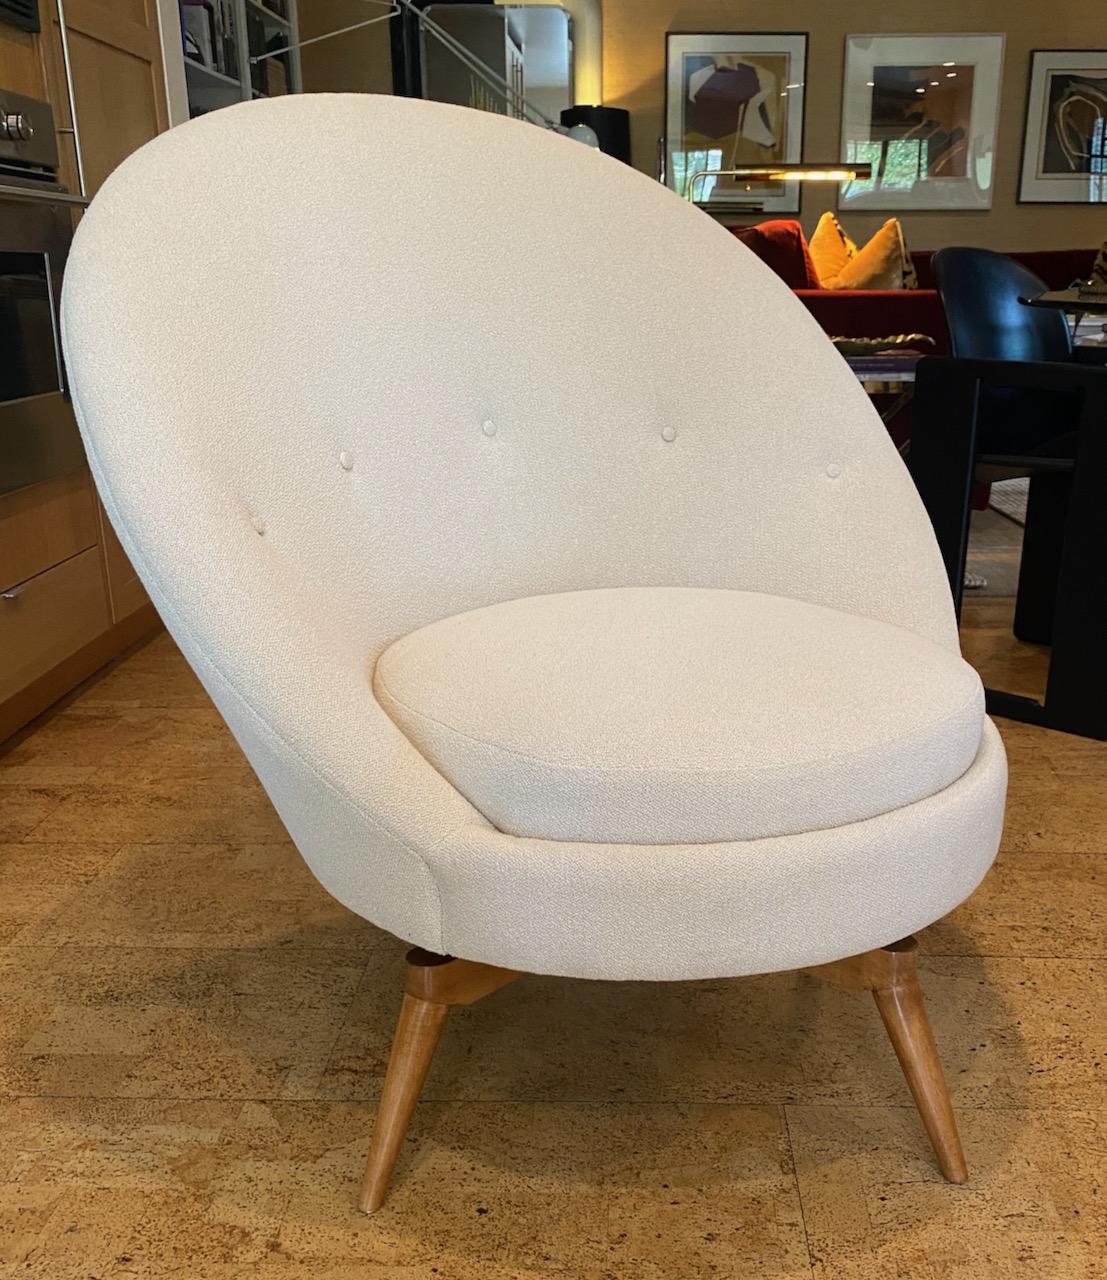 Dramatic and sculptural pair of swivel chairs upholstered in luxurious off-white Boucle with the bases in natural maple finish. These chairs are handcrafted of the finest materials and swivel quietly and smoothly on nylon ring bearing swivel plates.